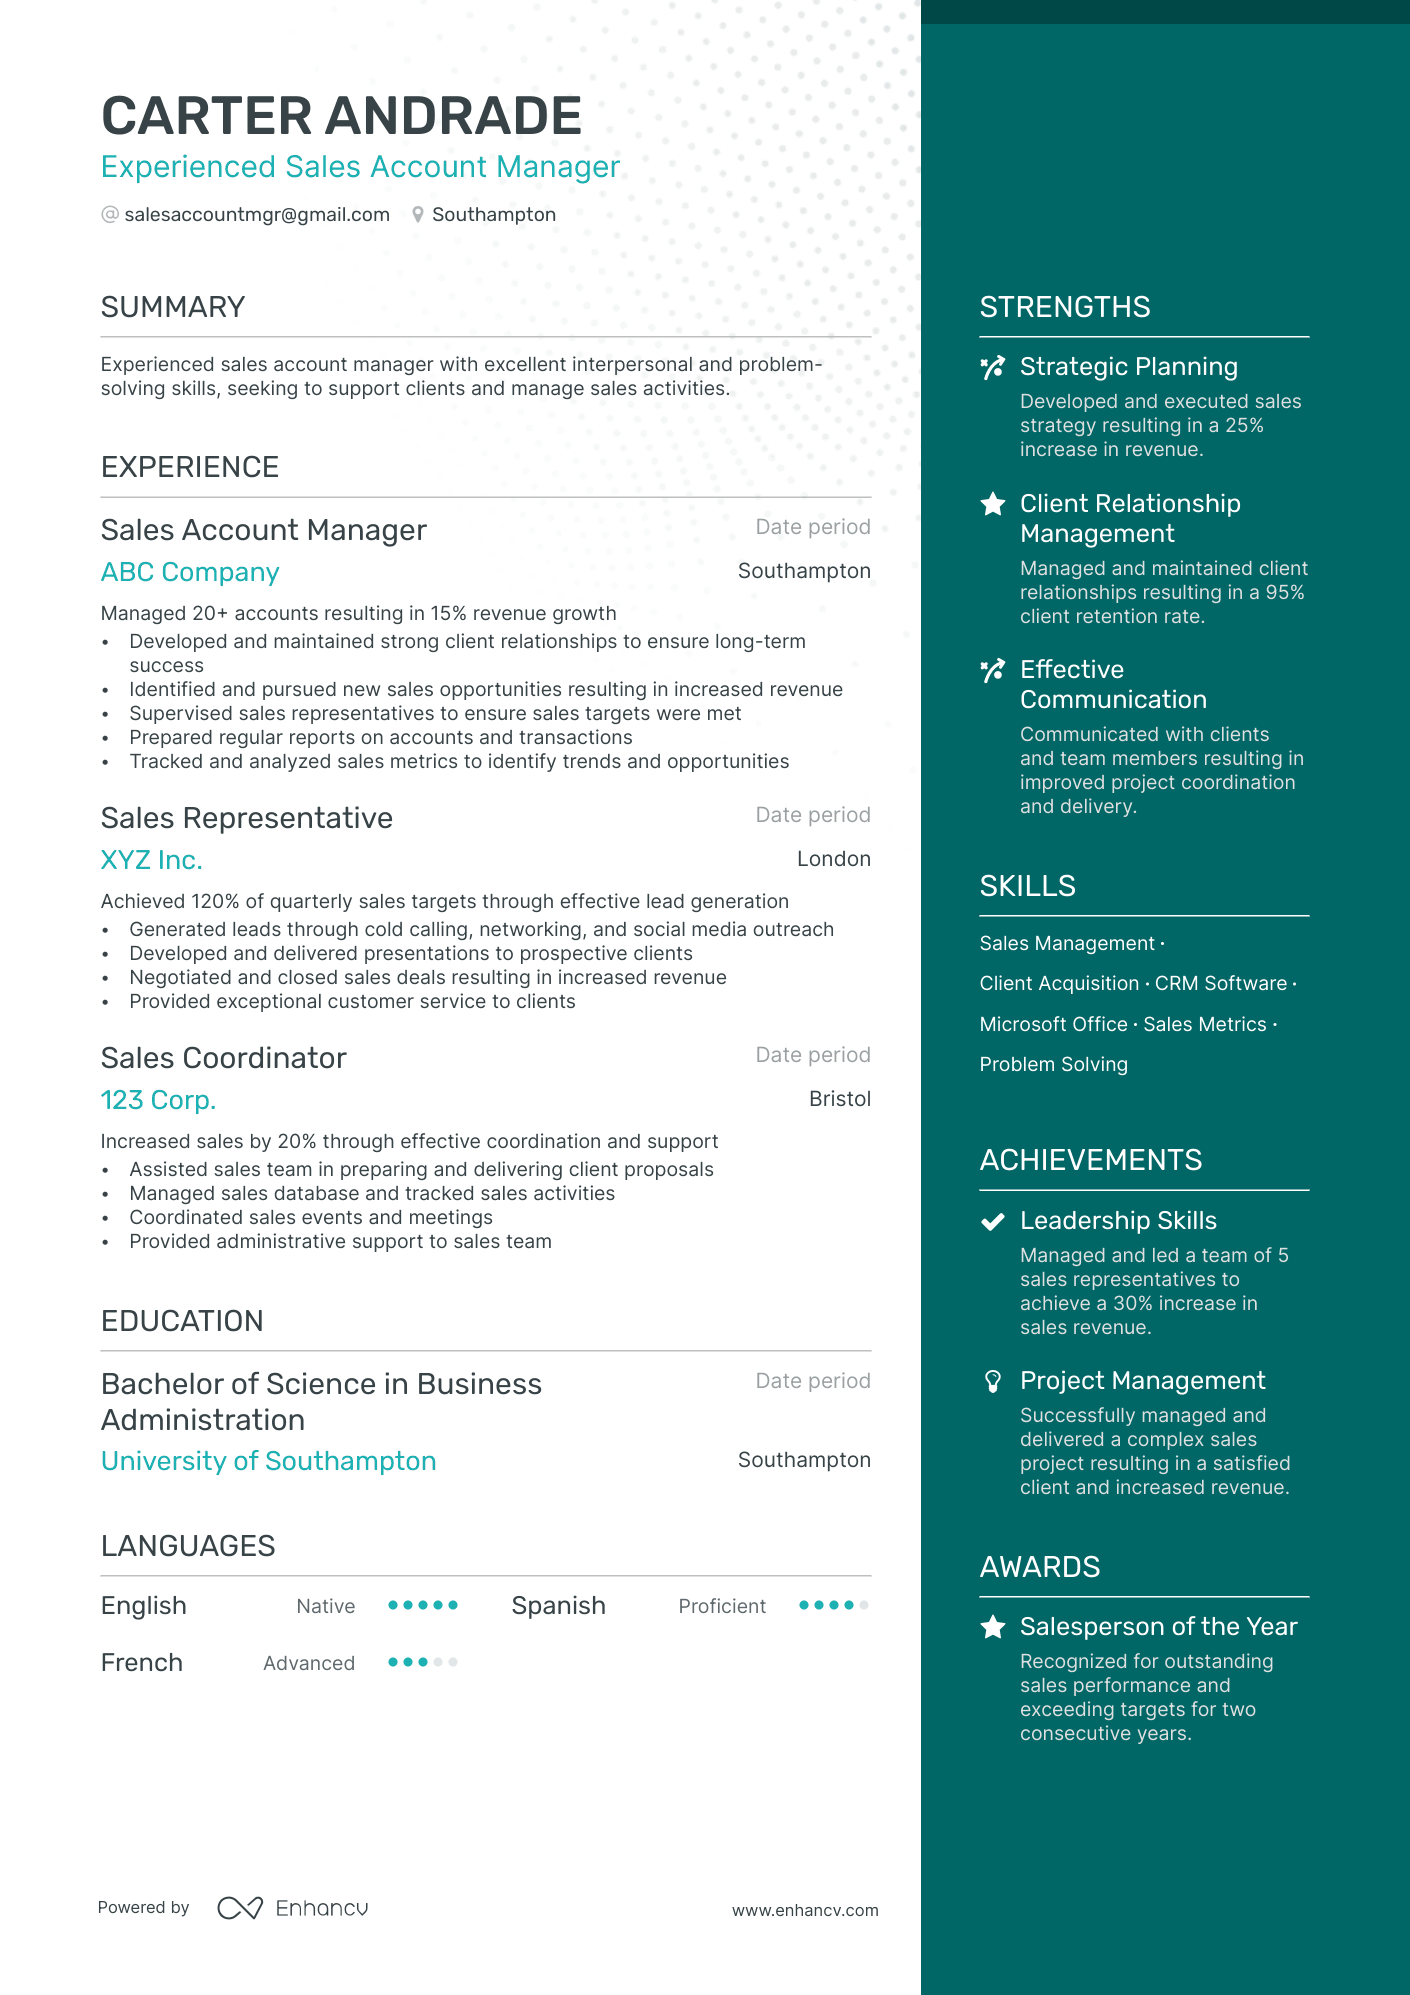 Sales Account Manager resume example